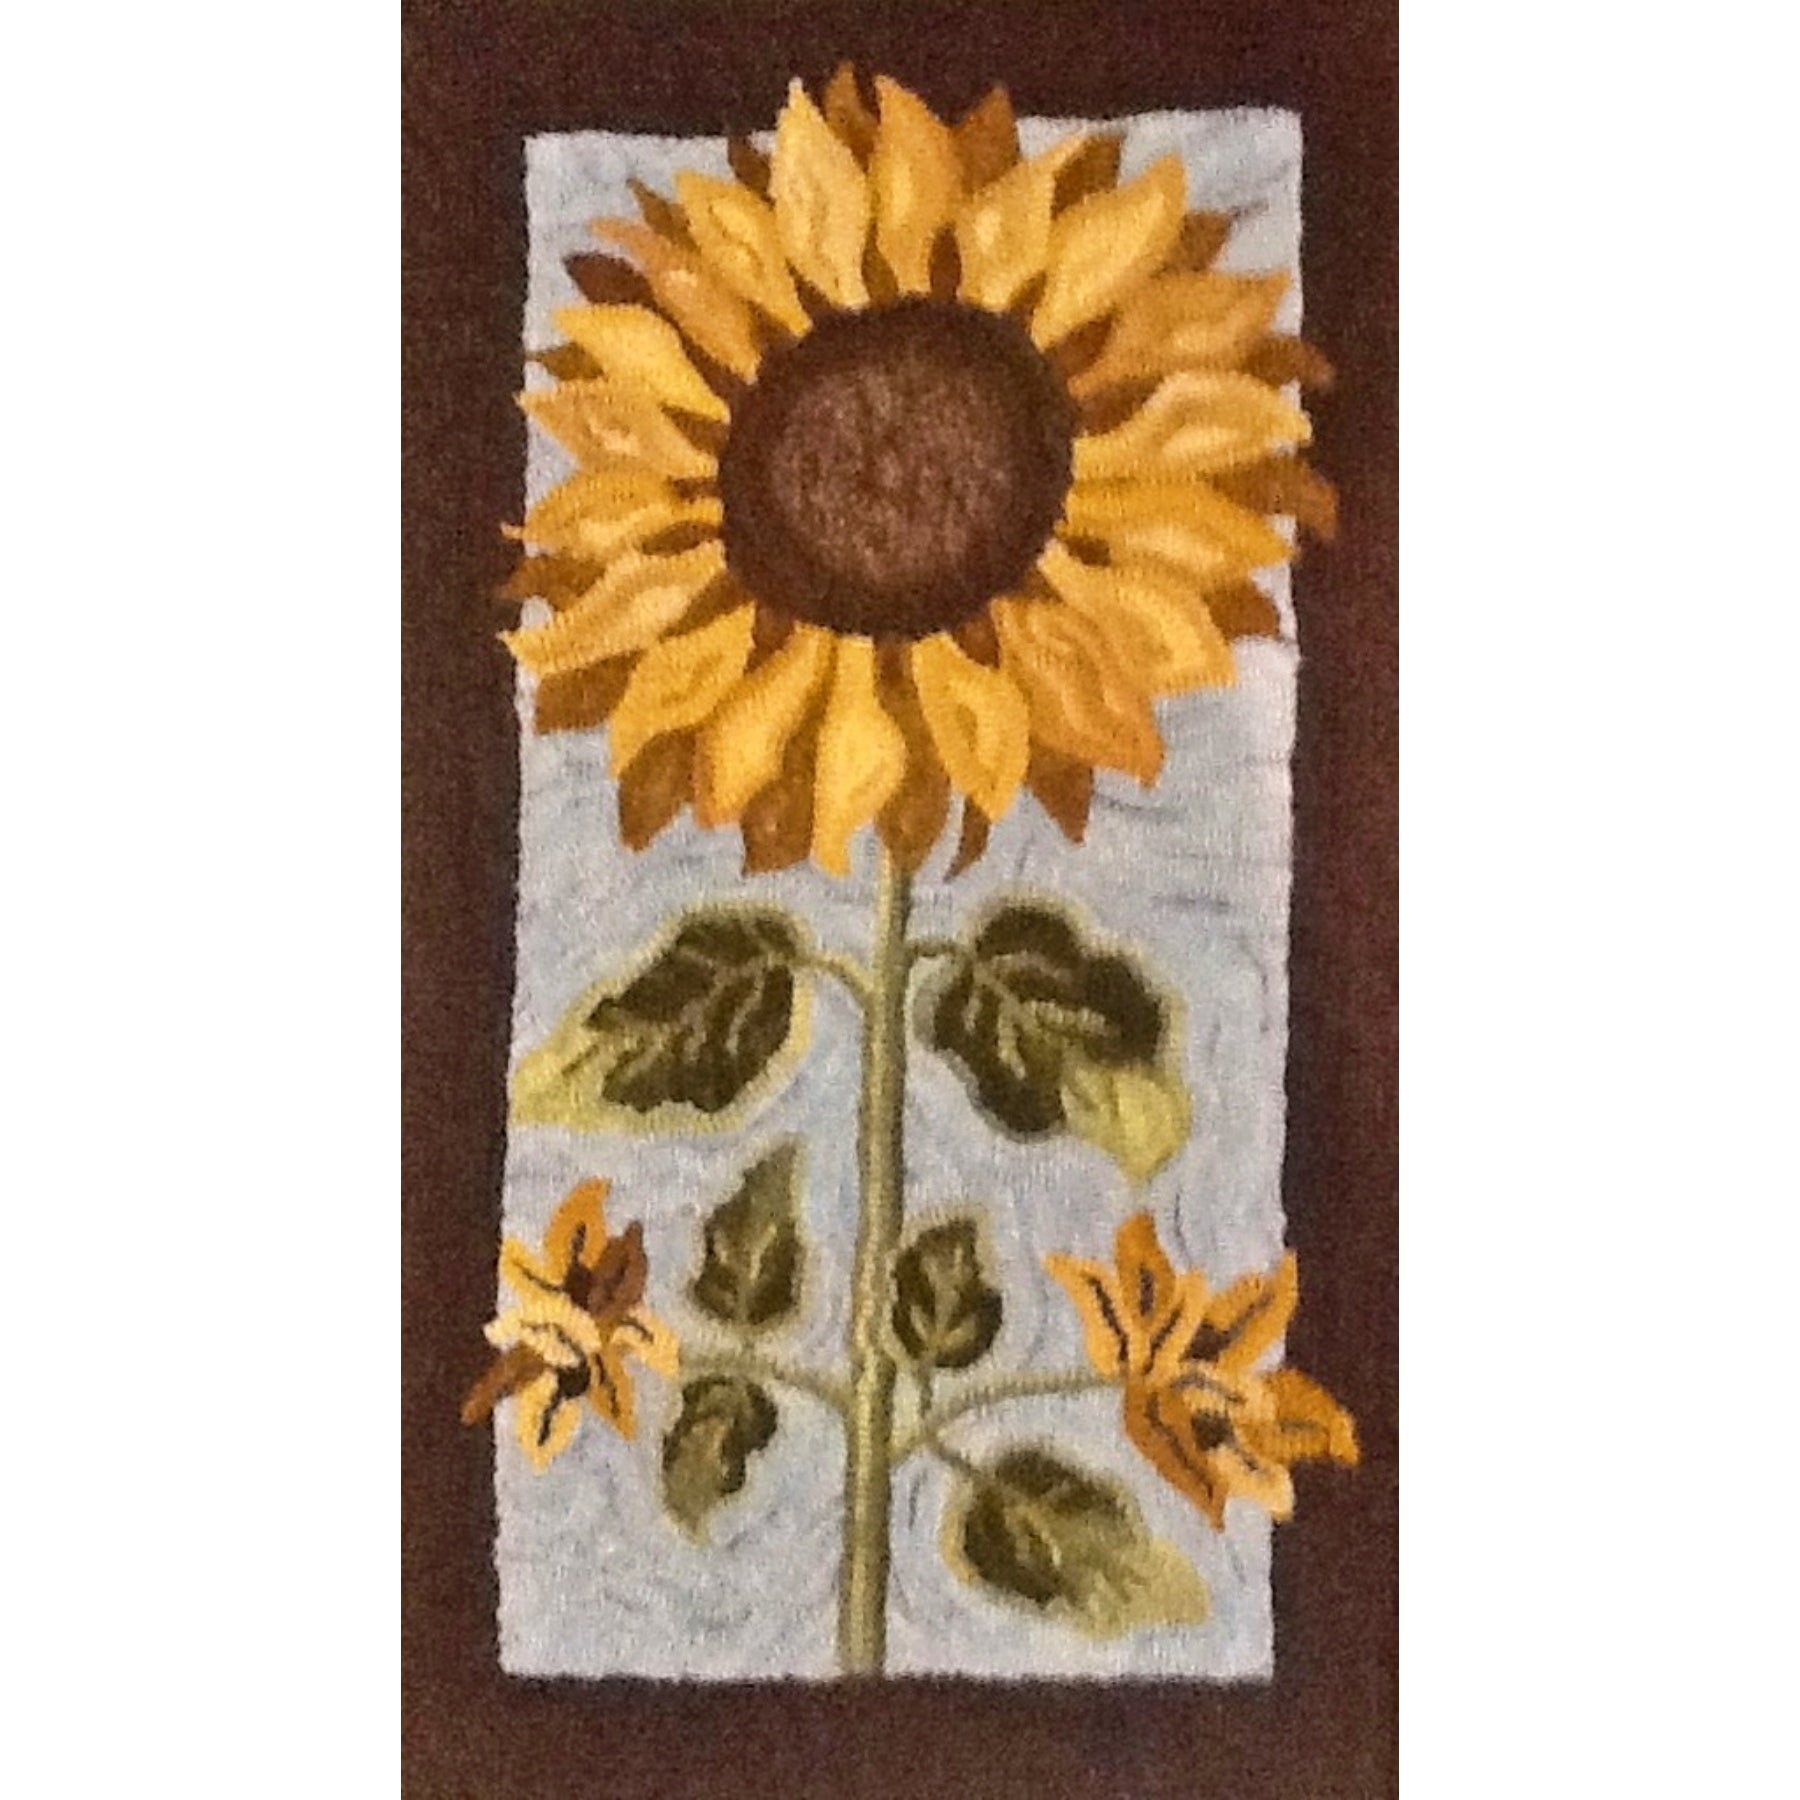 Sunflower, rug hooked by Louise Hulbert